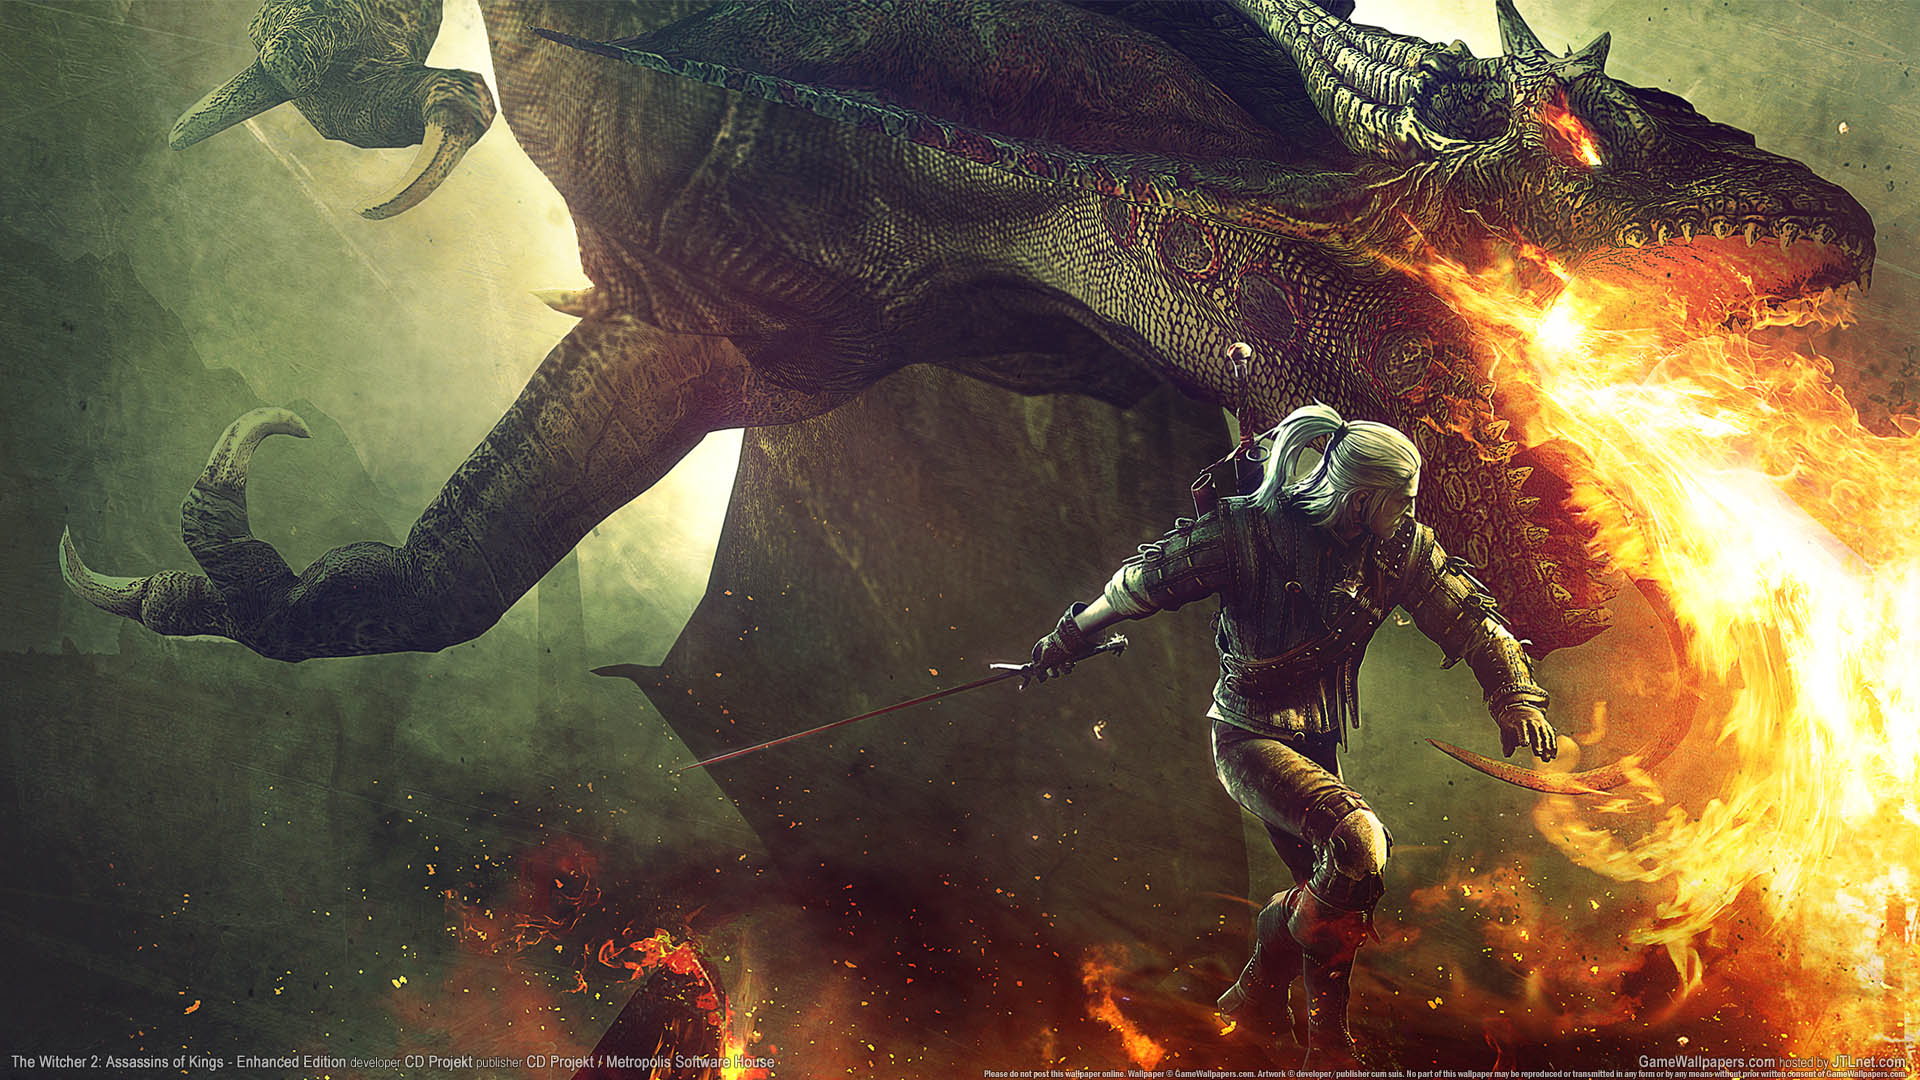 The Witcher 2: Assassins of Kings - Enhanced Edition wallpaper 01 1920x1080